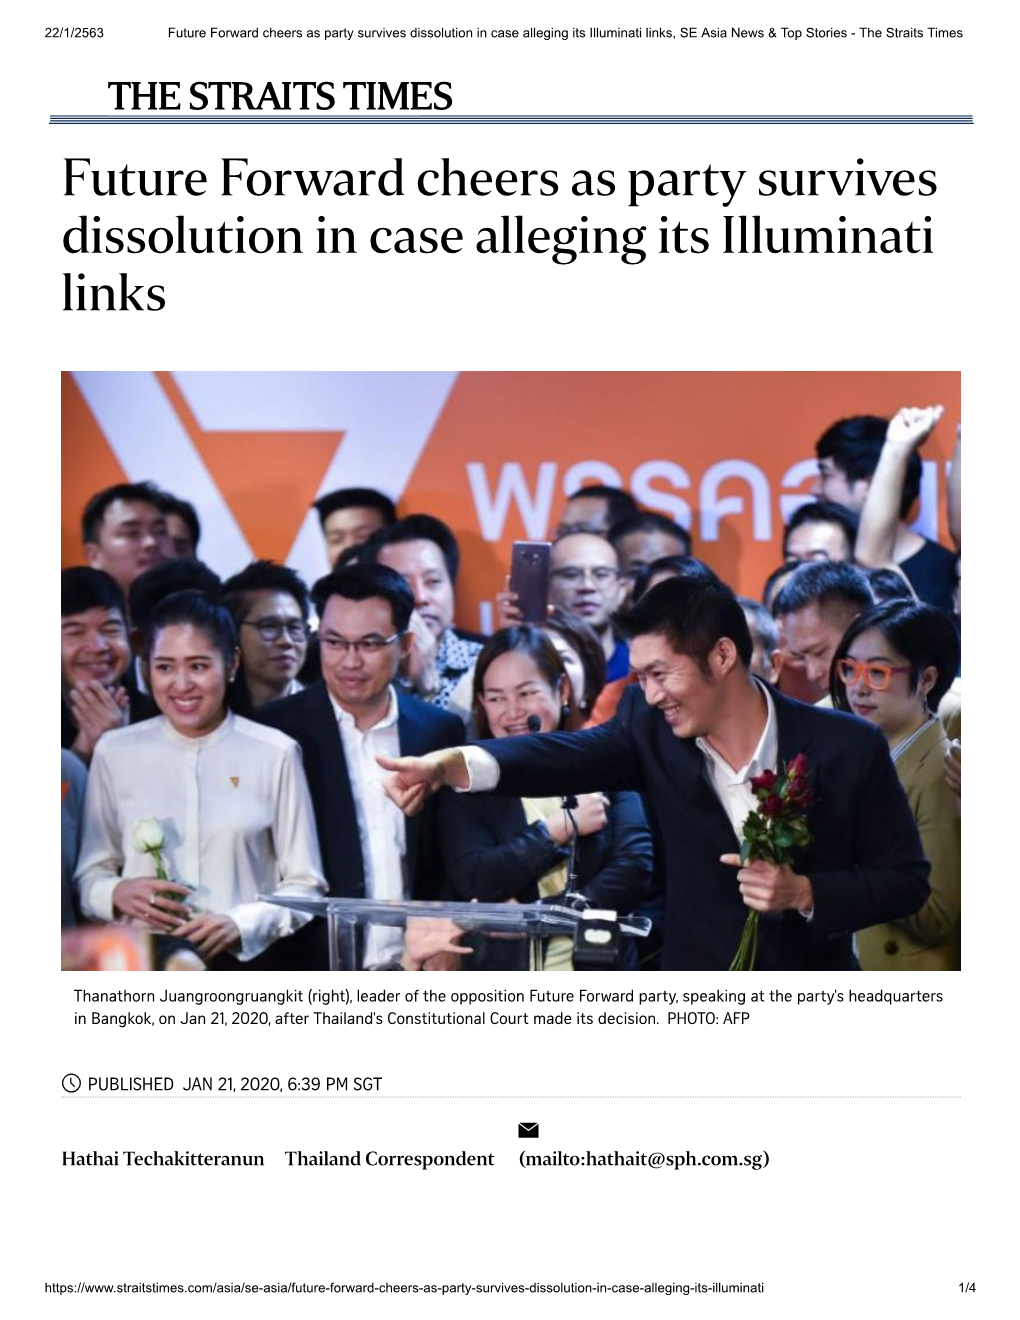 Future Forward Cheers As Party Survives Dissolution in Case Alleging Its Illuminati Links, SE Asia News & Top Stories - the Straits Times